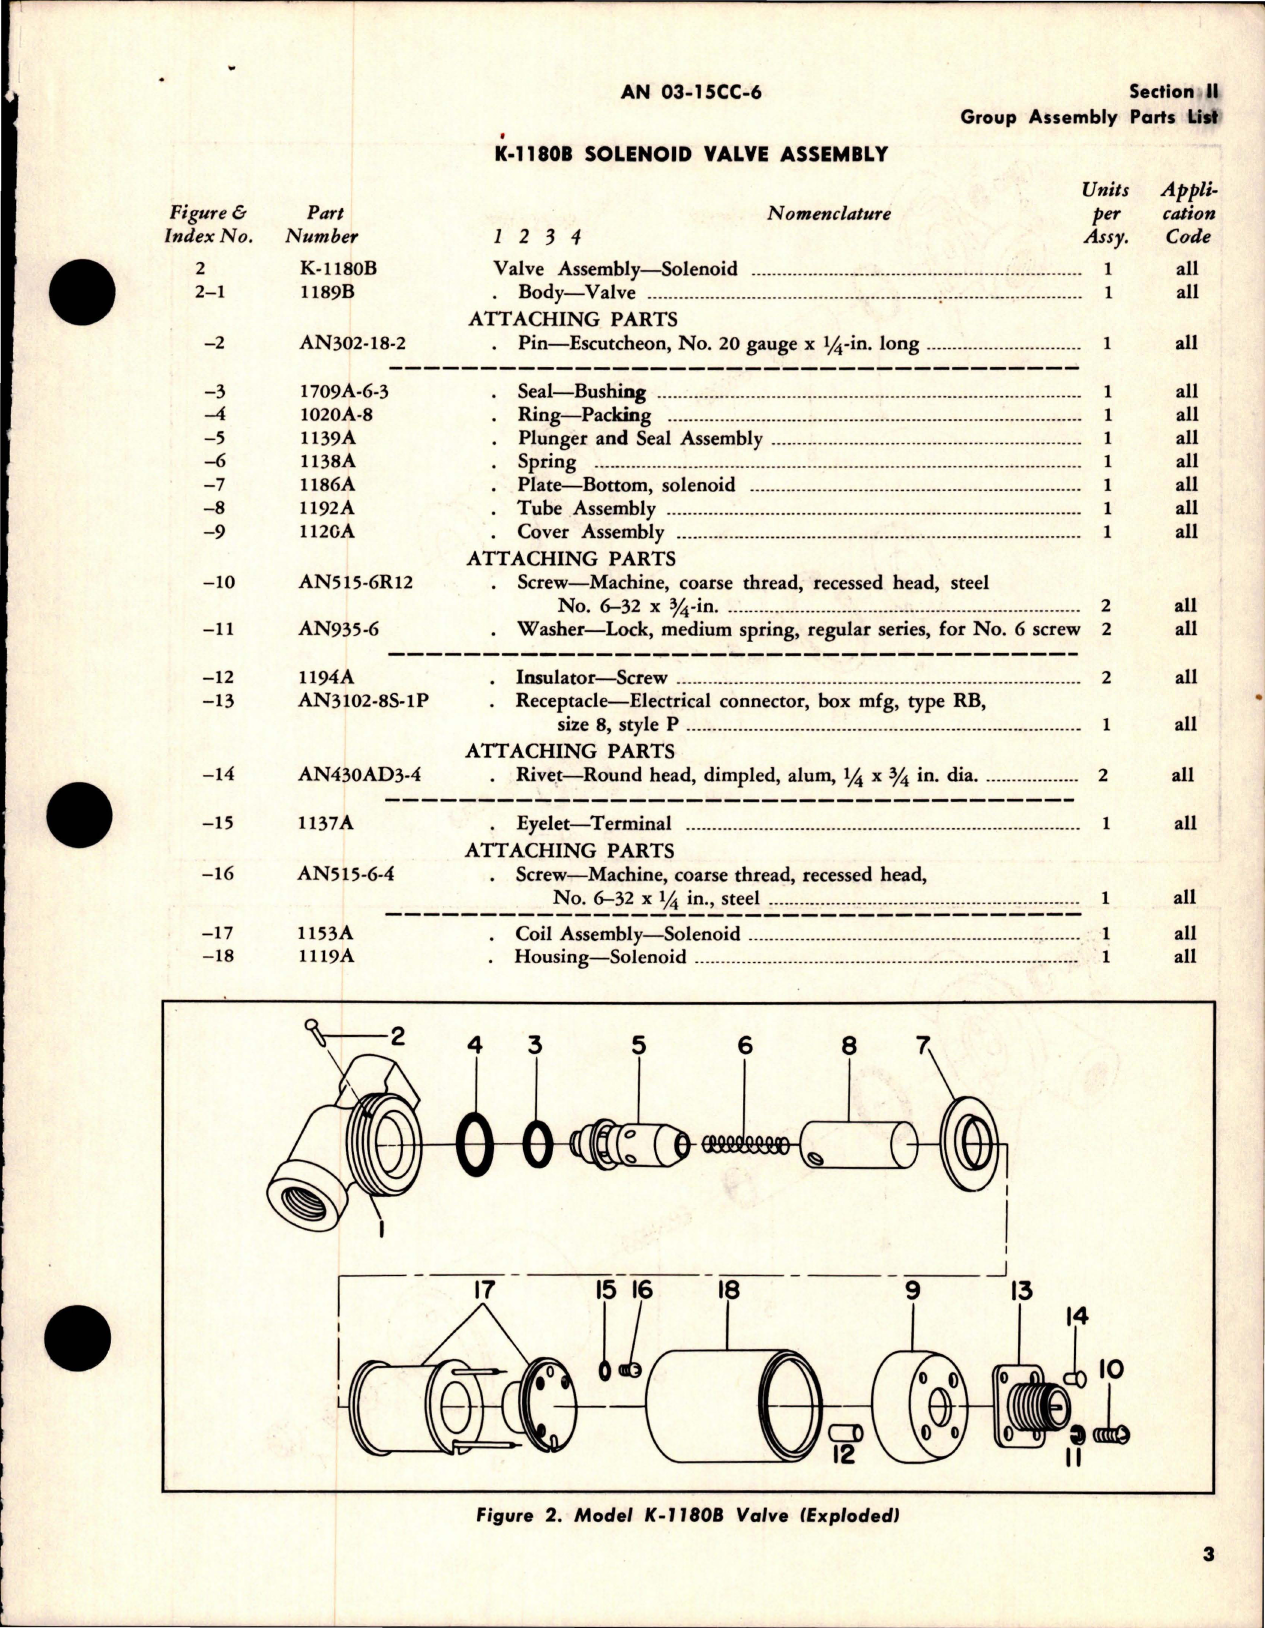 Sample page 5 from AirCorps Library document: Parts Catalog for Solenoid Valves - K1100, K1200 and 12,000 Series